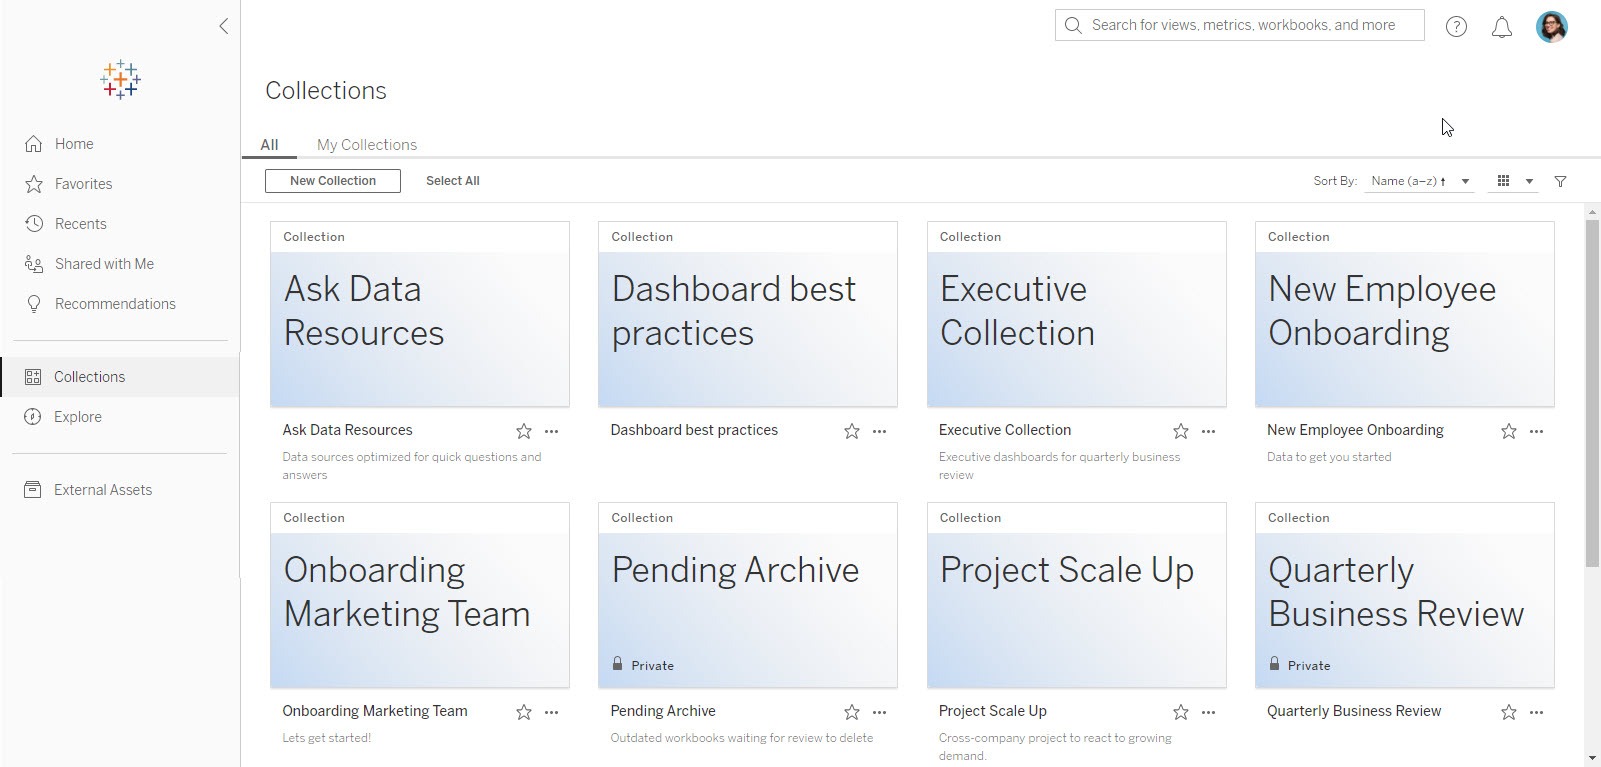 An image of the Collections feature in Tableau, which shows analytical content organized by themes or projects, such as Ask Data Resources, Onboarding Marketing Team, and Quarterly Business Review